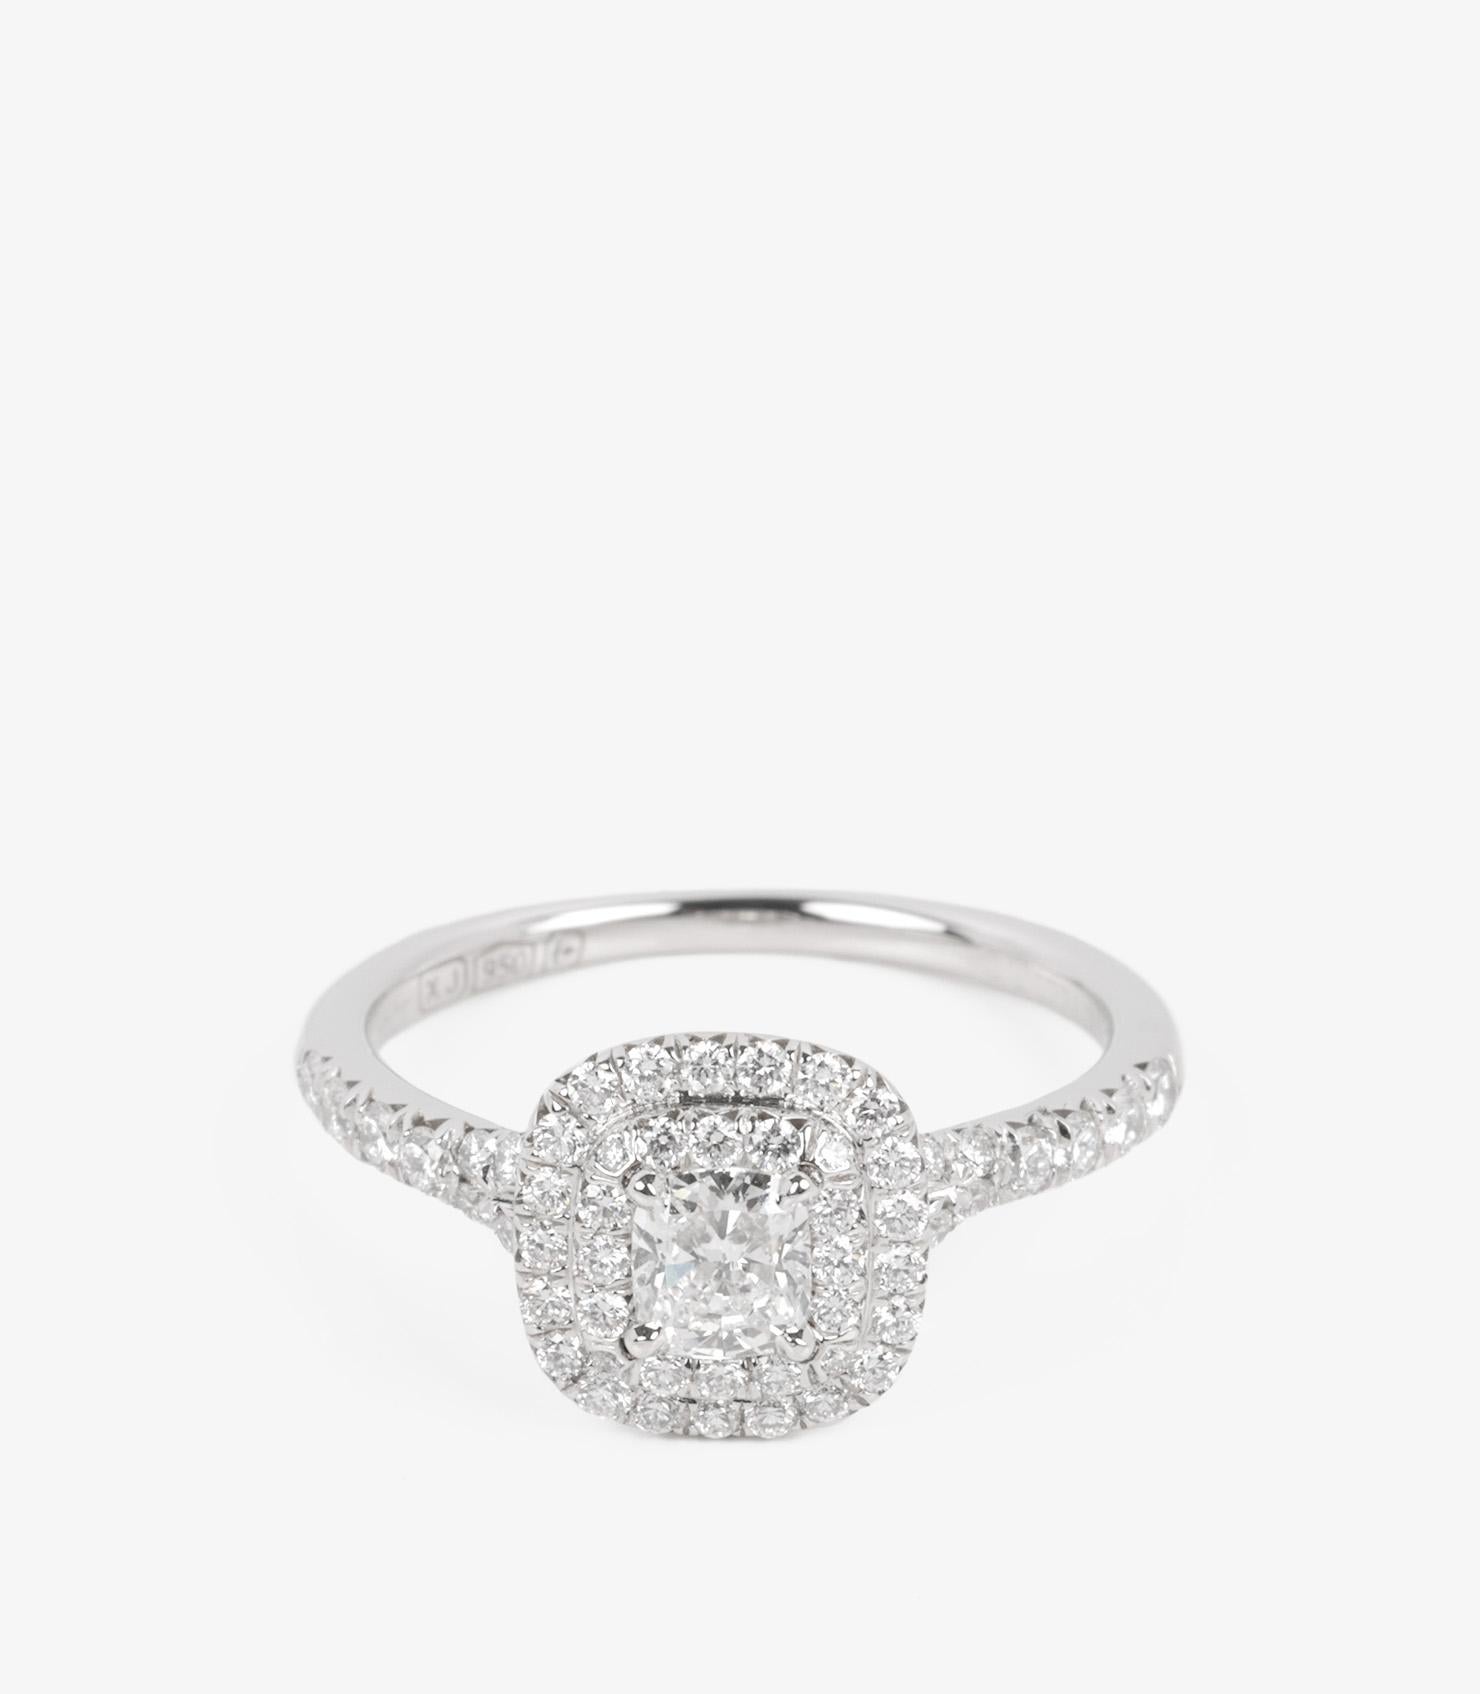 Tiffany & Co. 0.27ct Cushion Cut Diamond Platinum Soleste Ring

Brand- Tiffany & Co.
Model- 0.27ct Diamond Soleste Ring
Product Type- Ring
Serial Number- 27******
Age- Circa 2011
Accompanied By- Tiffany & Co. Box and Certificate
Material(s)-